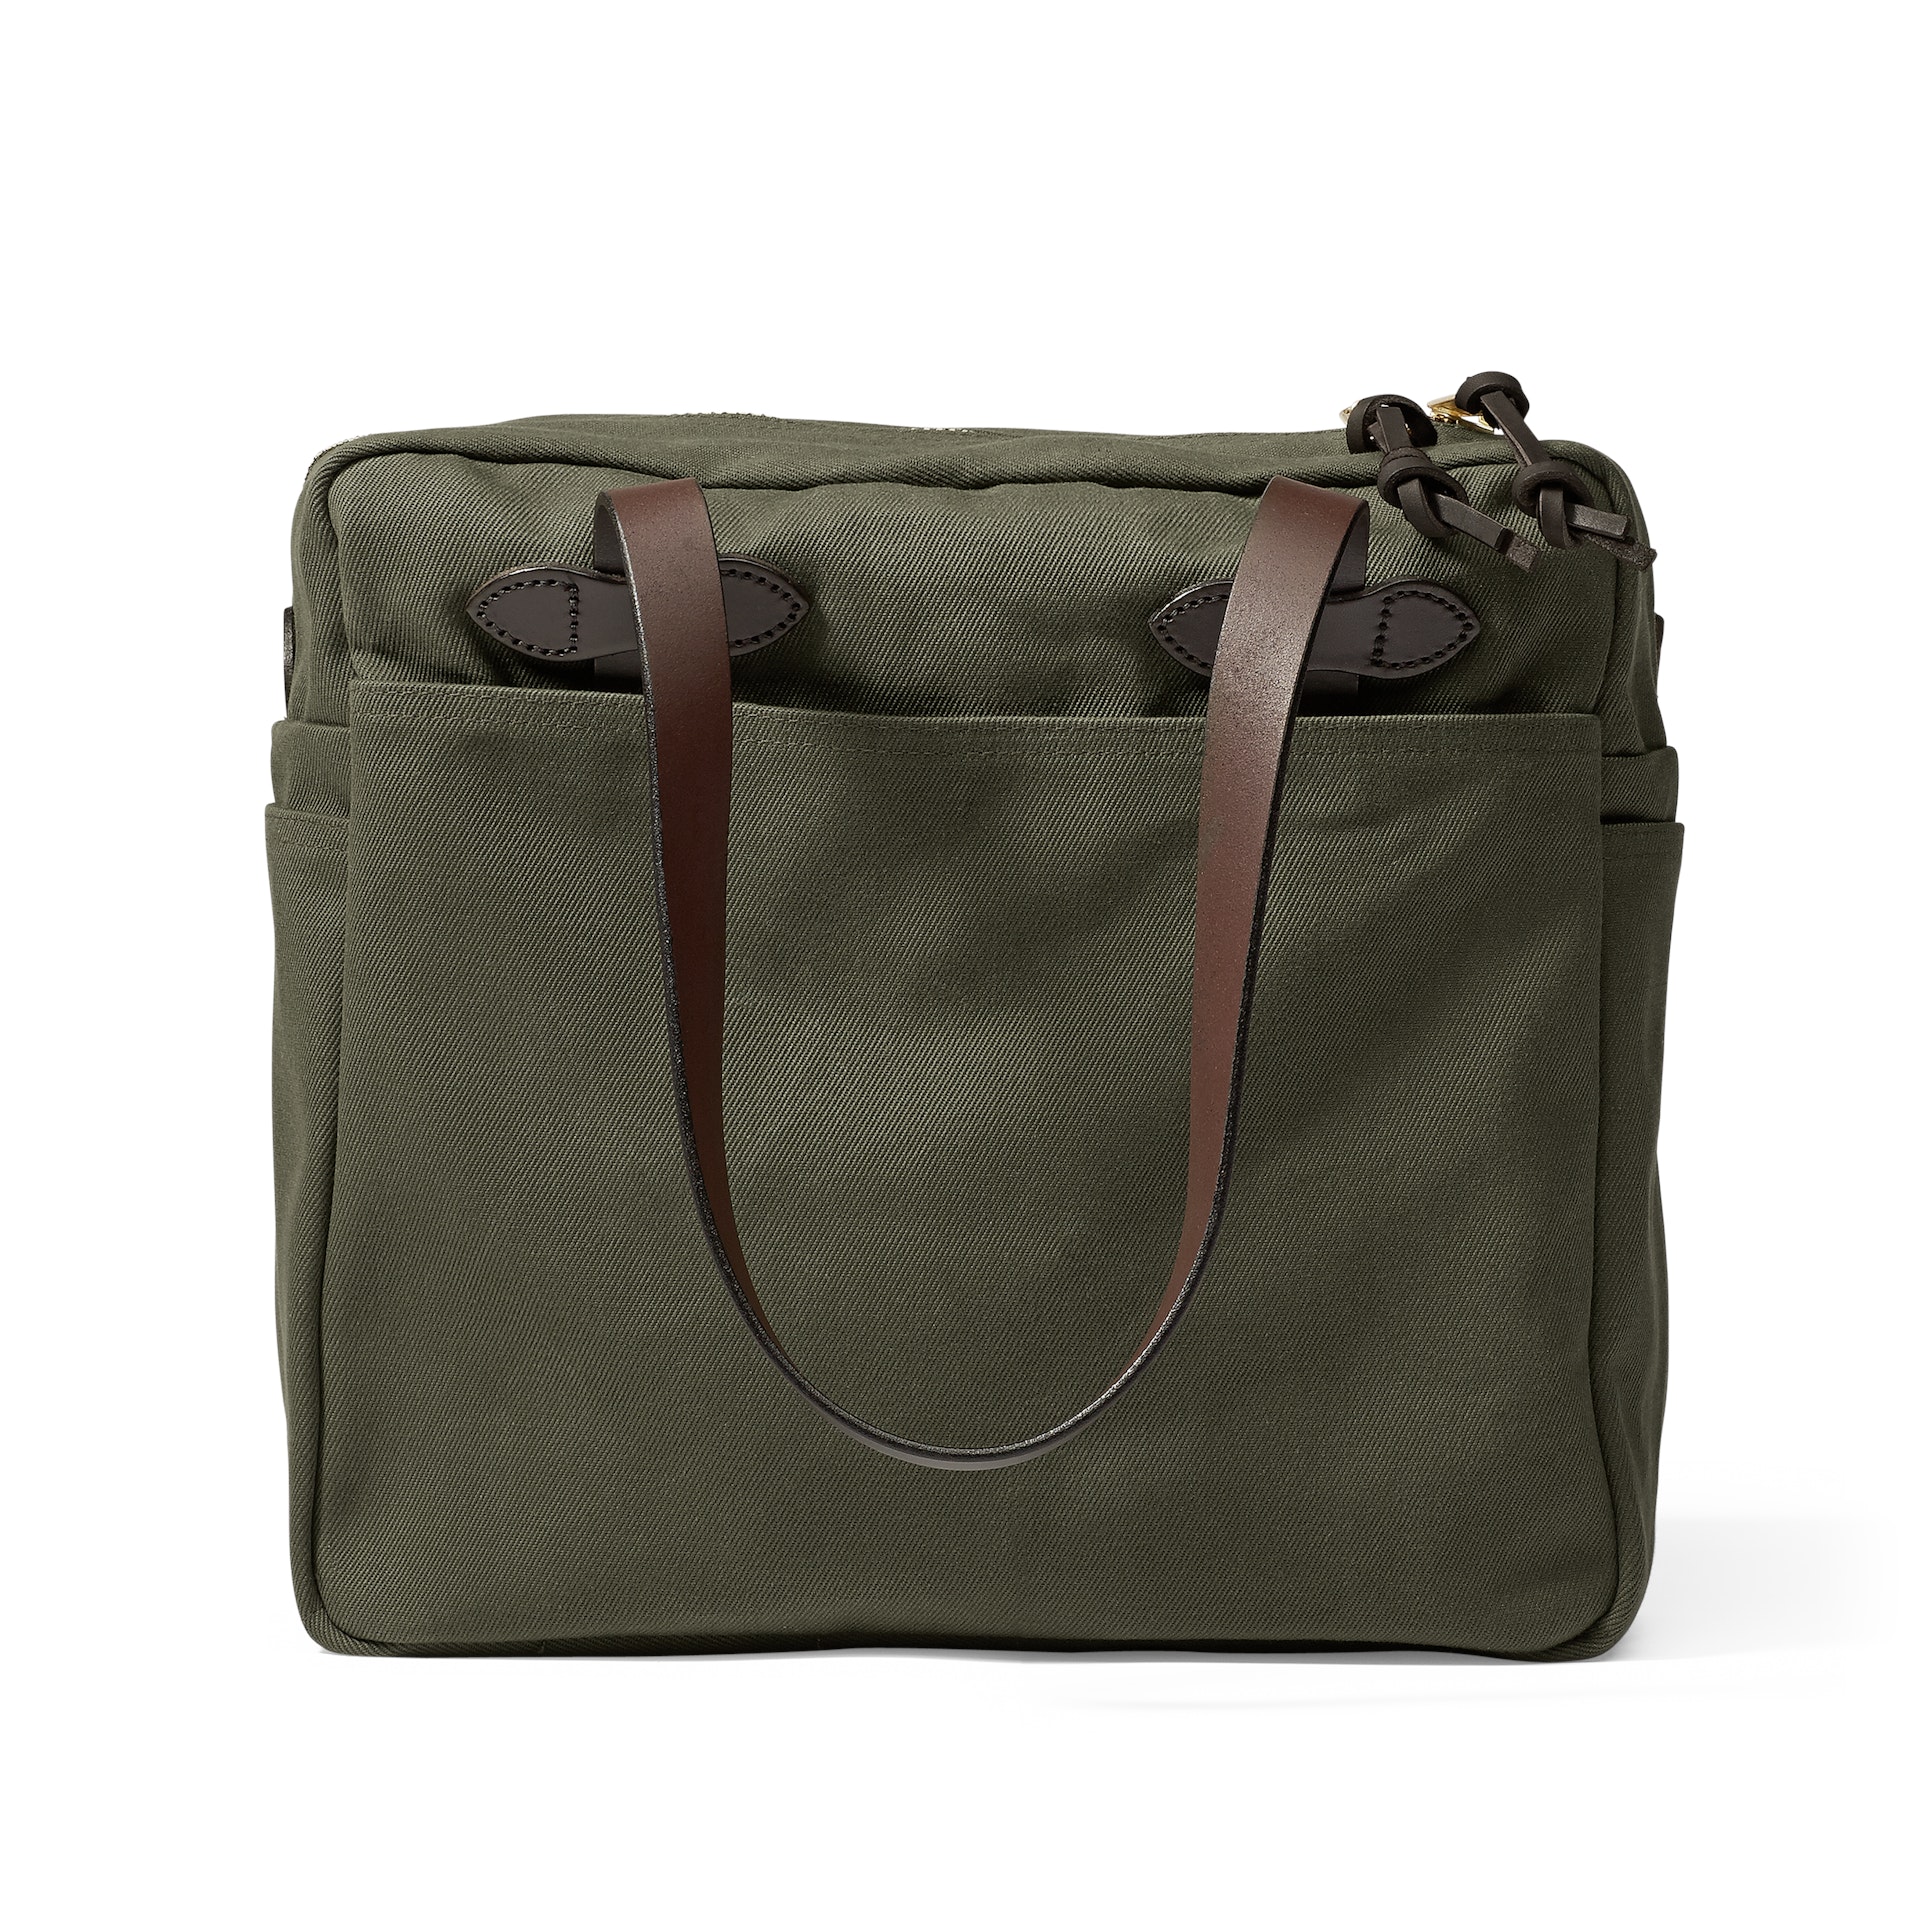 Rugged Twill Zippered Tote Bag | Filson